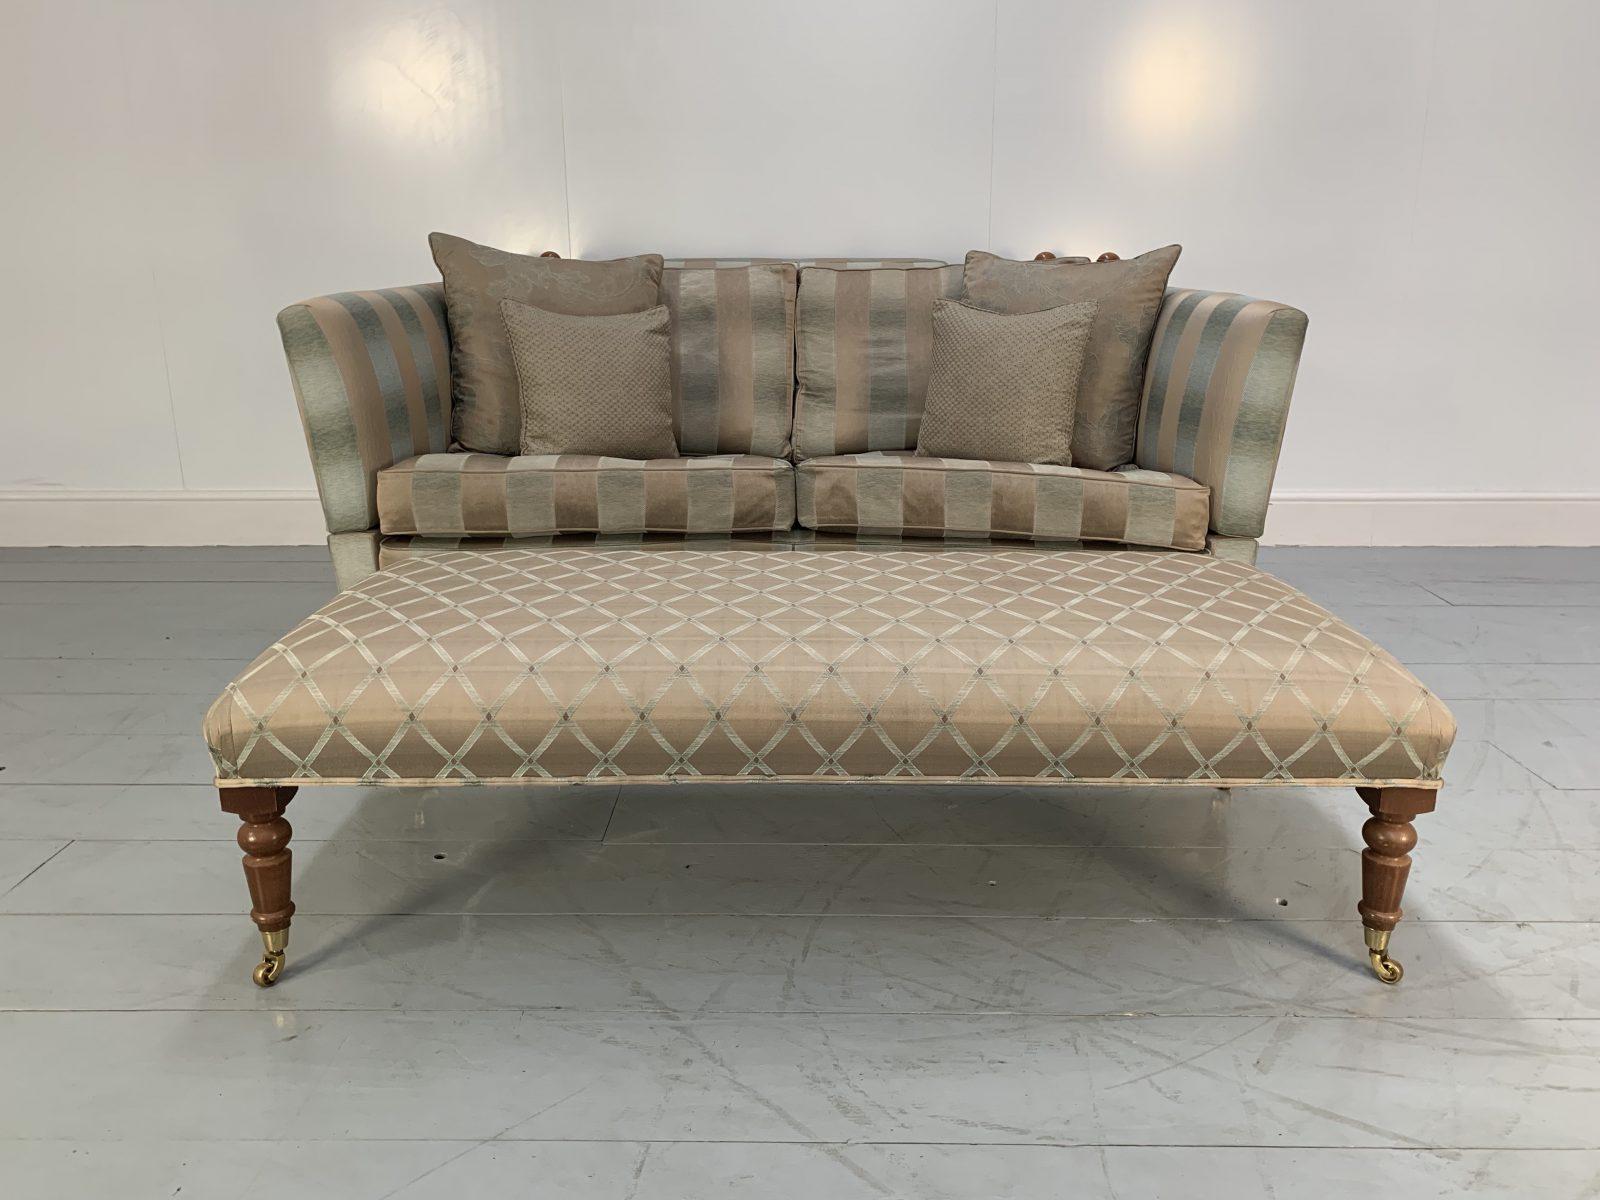 On offer on this occasion is a superb, majestic Duresta “Hornblower” cushion-back 2.5-seat sofa and a “Rectory” footstool, with the sofa dressed in their stunning, tactile and unashamedly luxurious pale-gold broad-stripe and large-check